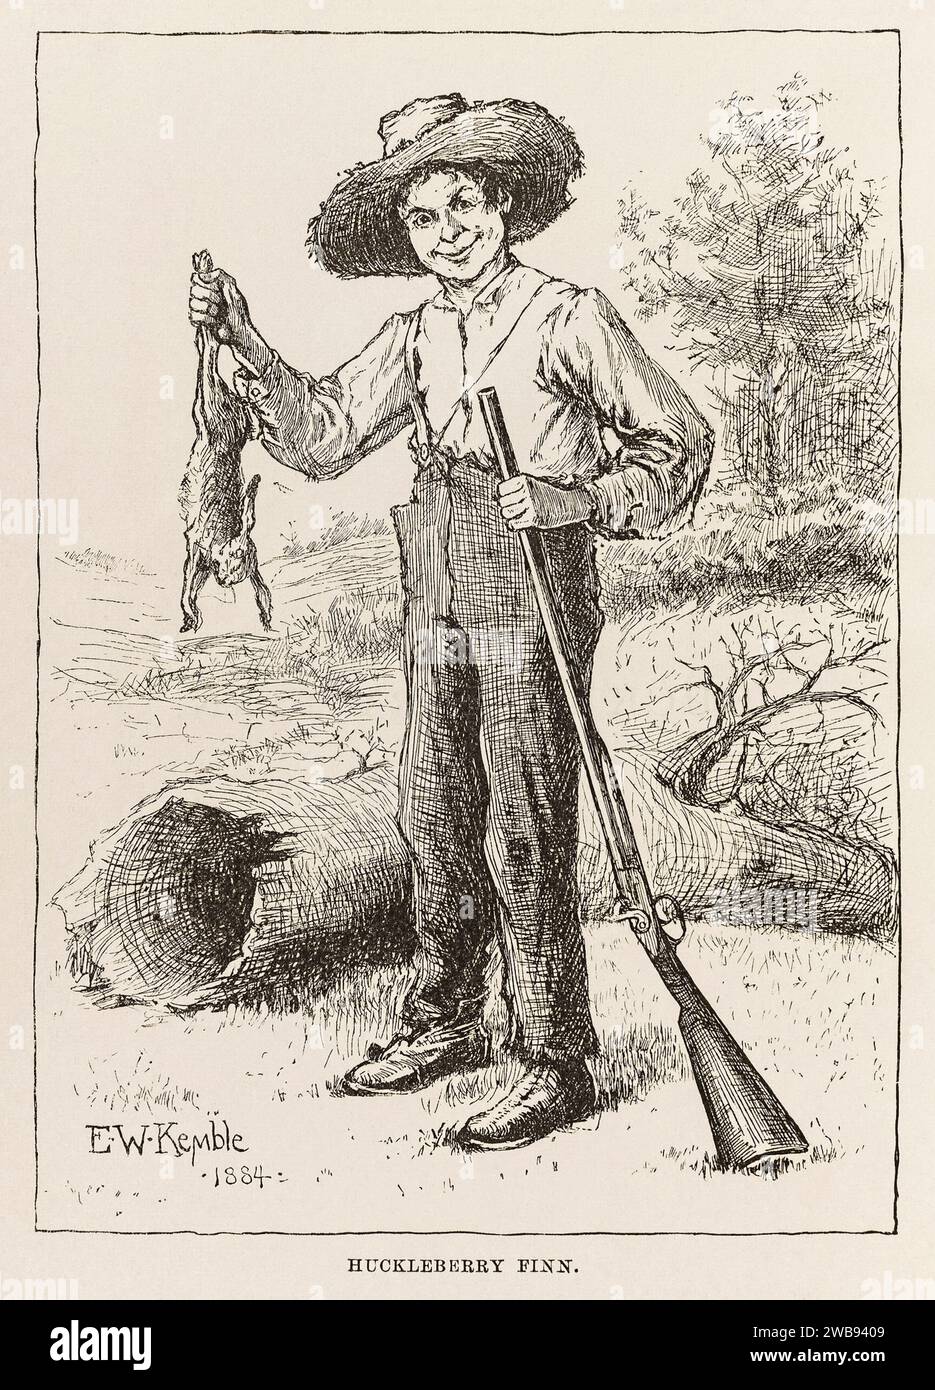 ‘Huckberry Finn’ frontispiece illustration from ‘Adventures of Huckleberry Finn (Tom Sawyer's Comrade)’ by Mark Twain (1835-1910), artwork by E. W. Kemble (1861-1933). Photograph from a 1885 US first edition. Credit: Private Collection / AF Fotografie Stock Photo